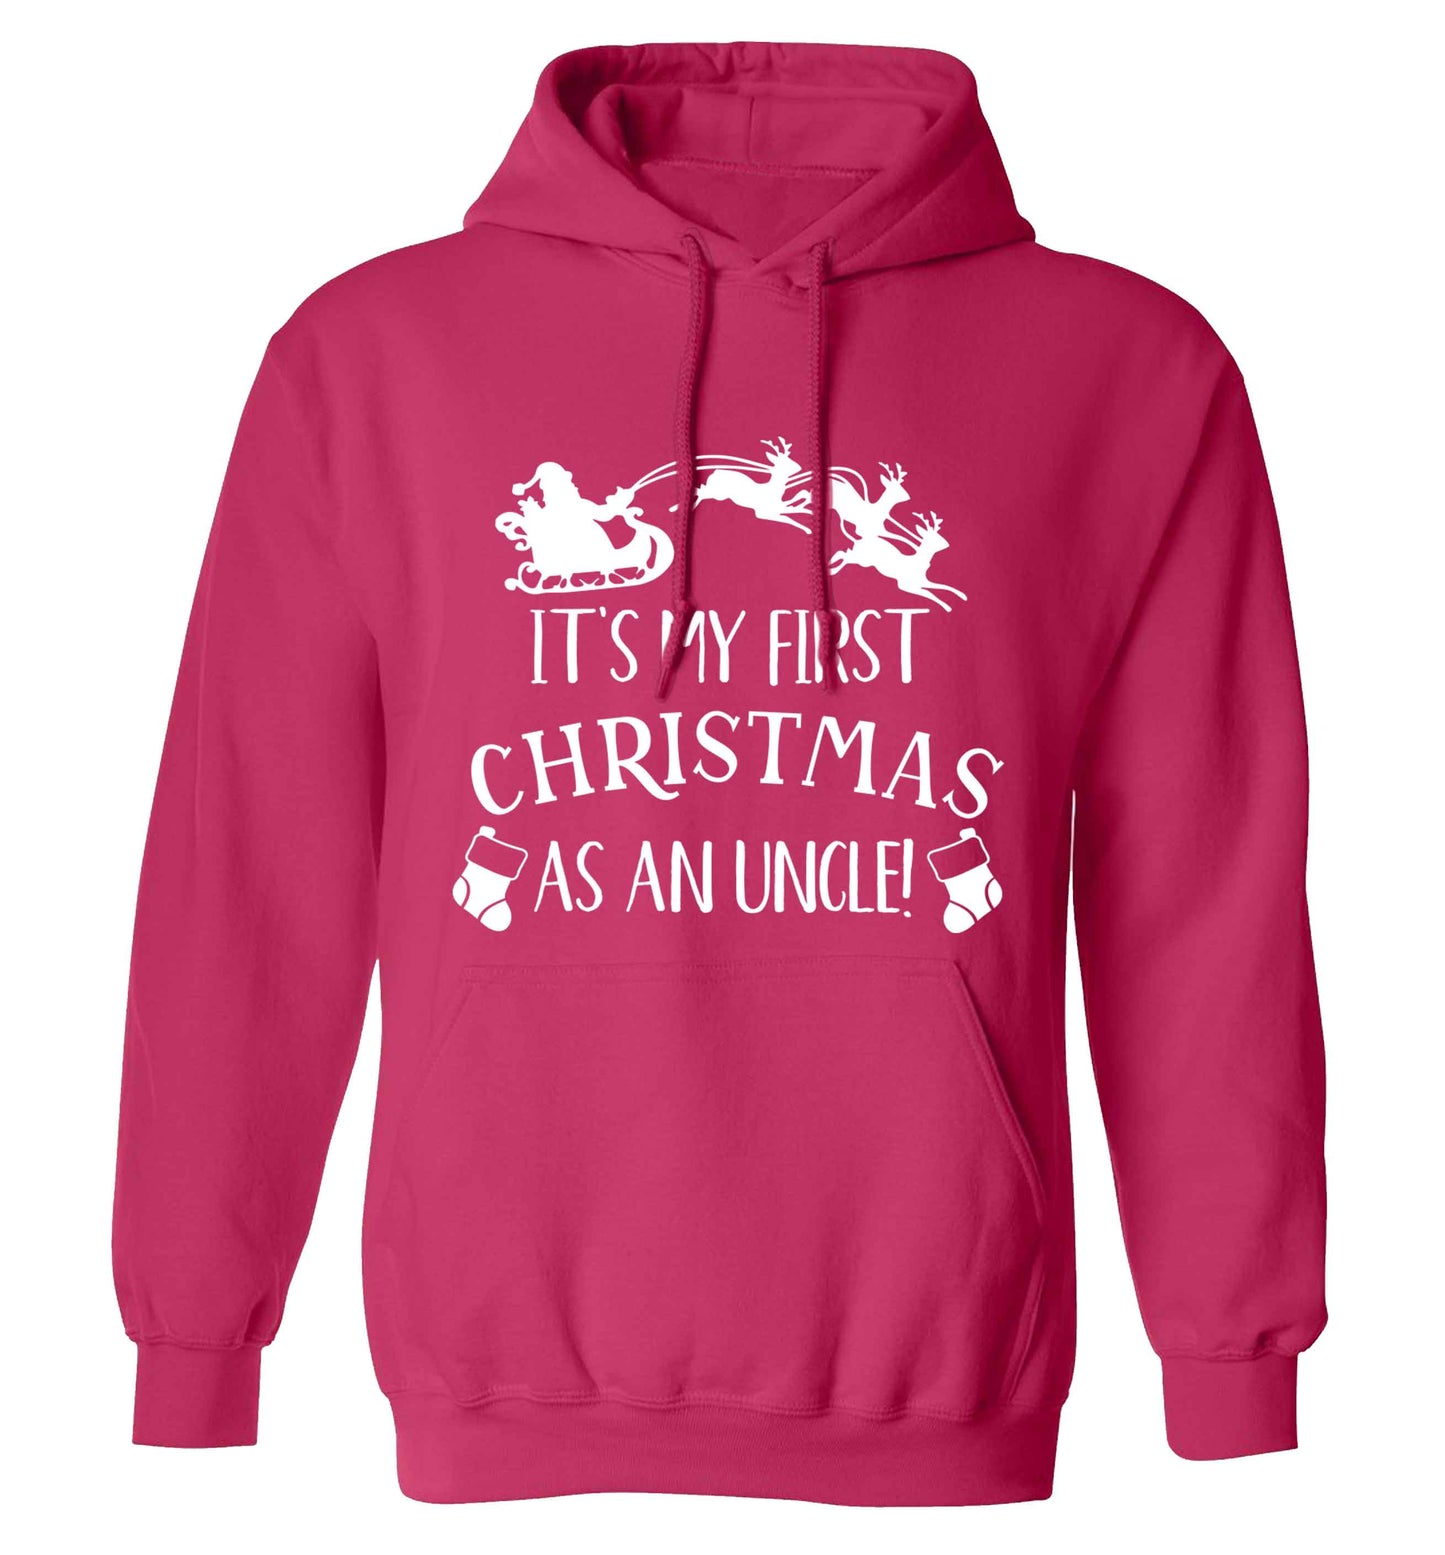 It's my first Christmas as an uncle! adults unisex pink hoodie 2XL